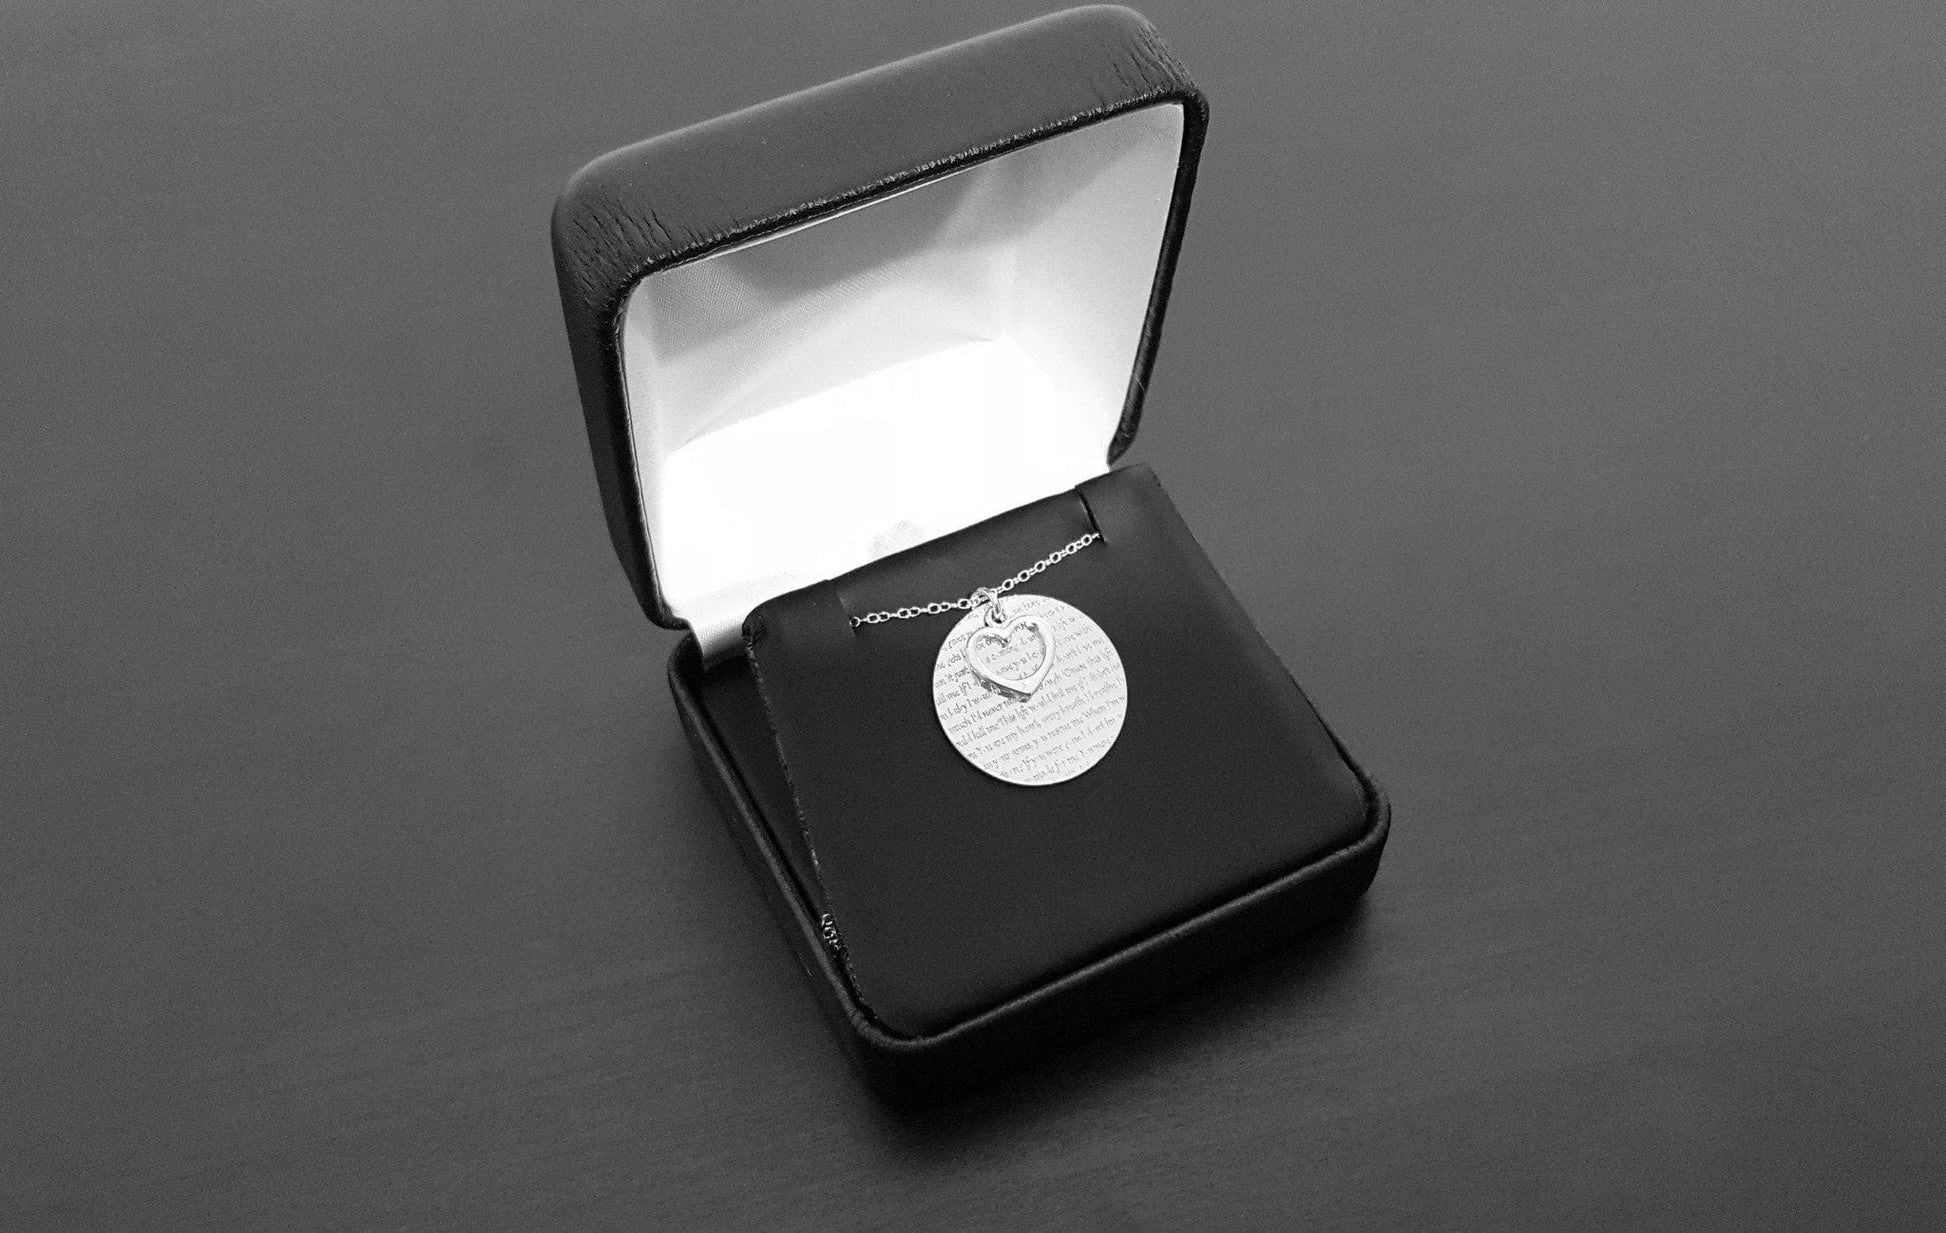 Record My Love Necklace - Engraved with the Song or Poem of Your Choice! - Premium Jewelry & Accessories - Necklaces & Pendants - Just €149! Shop now at San Rocco Italia